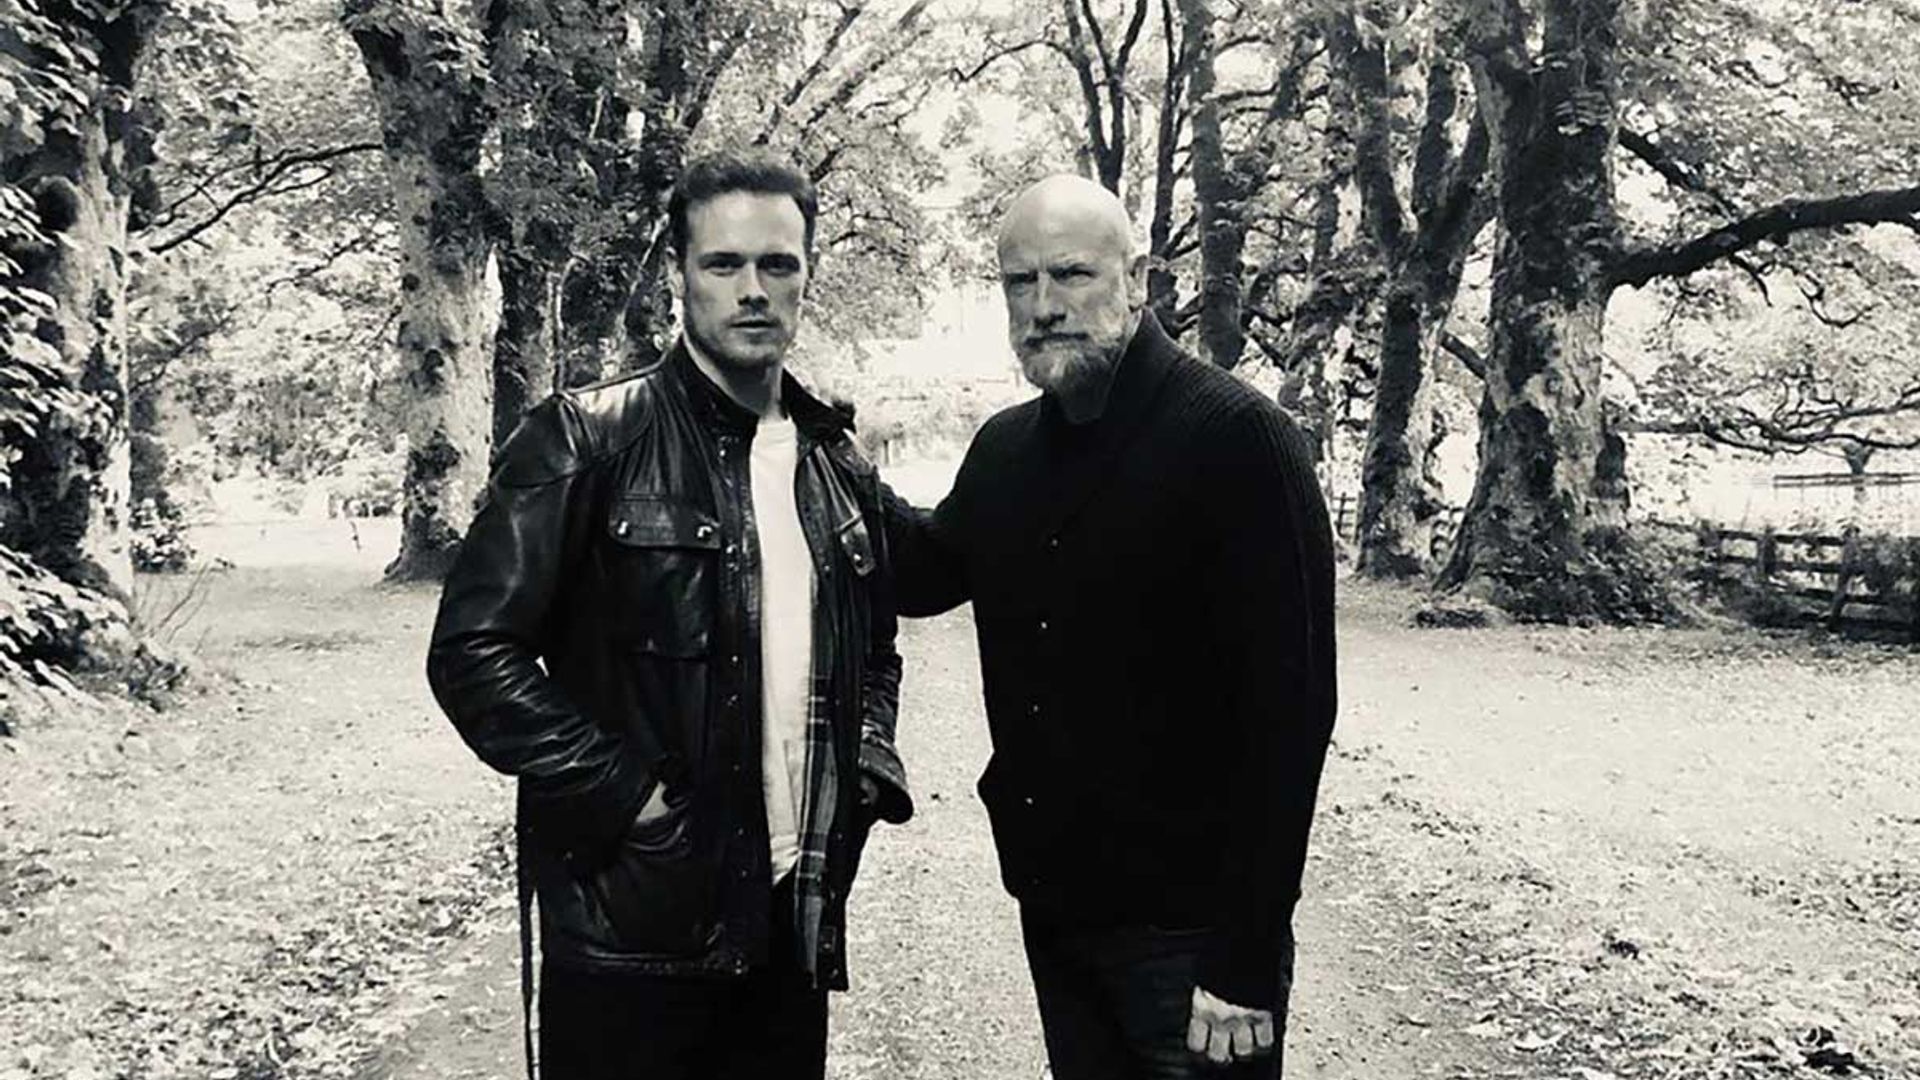 Sam Heughan and Outlander co-star Graham McTavish reveal they had 'near-misses' during Scotland road trip